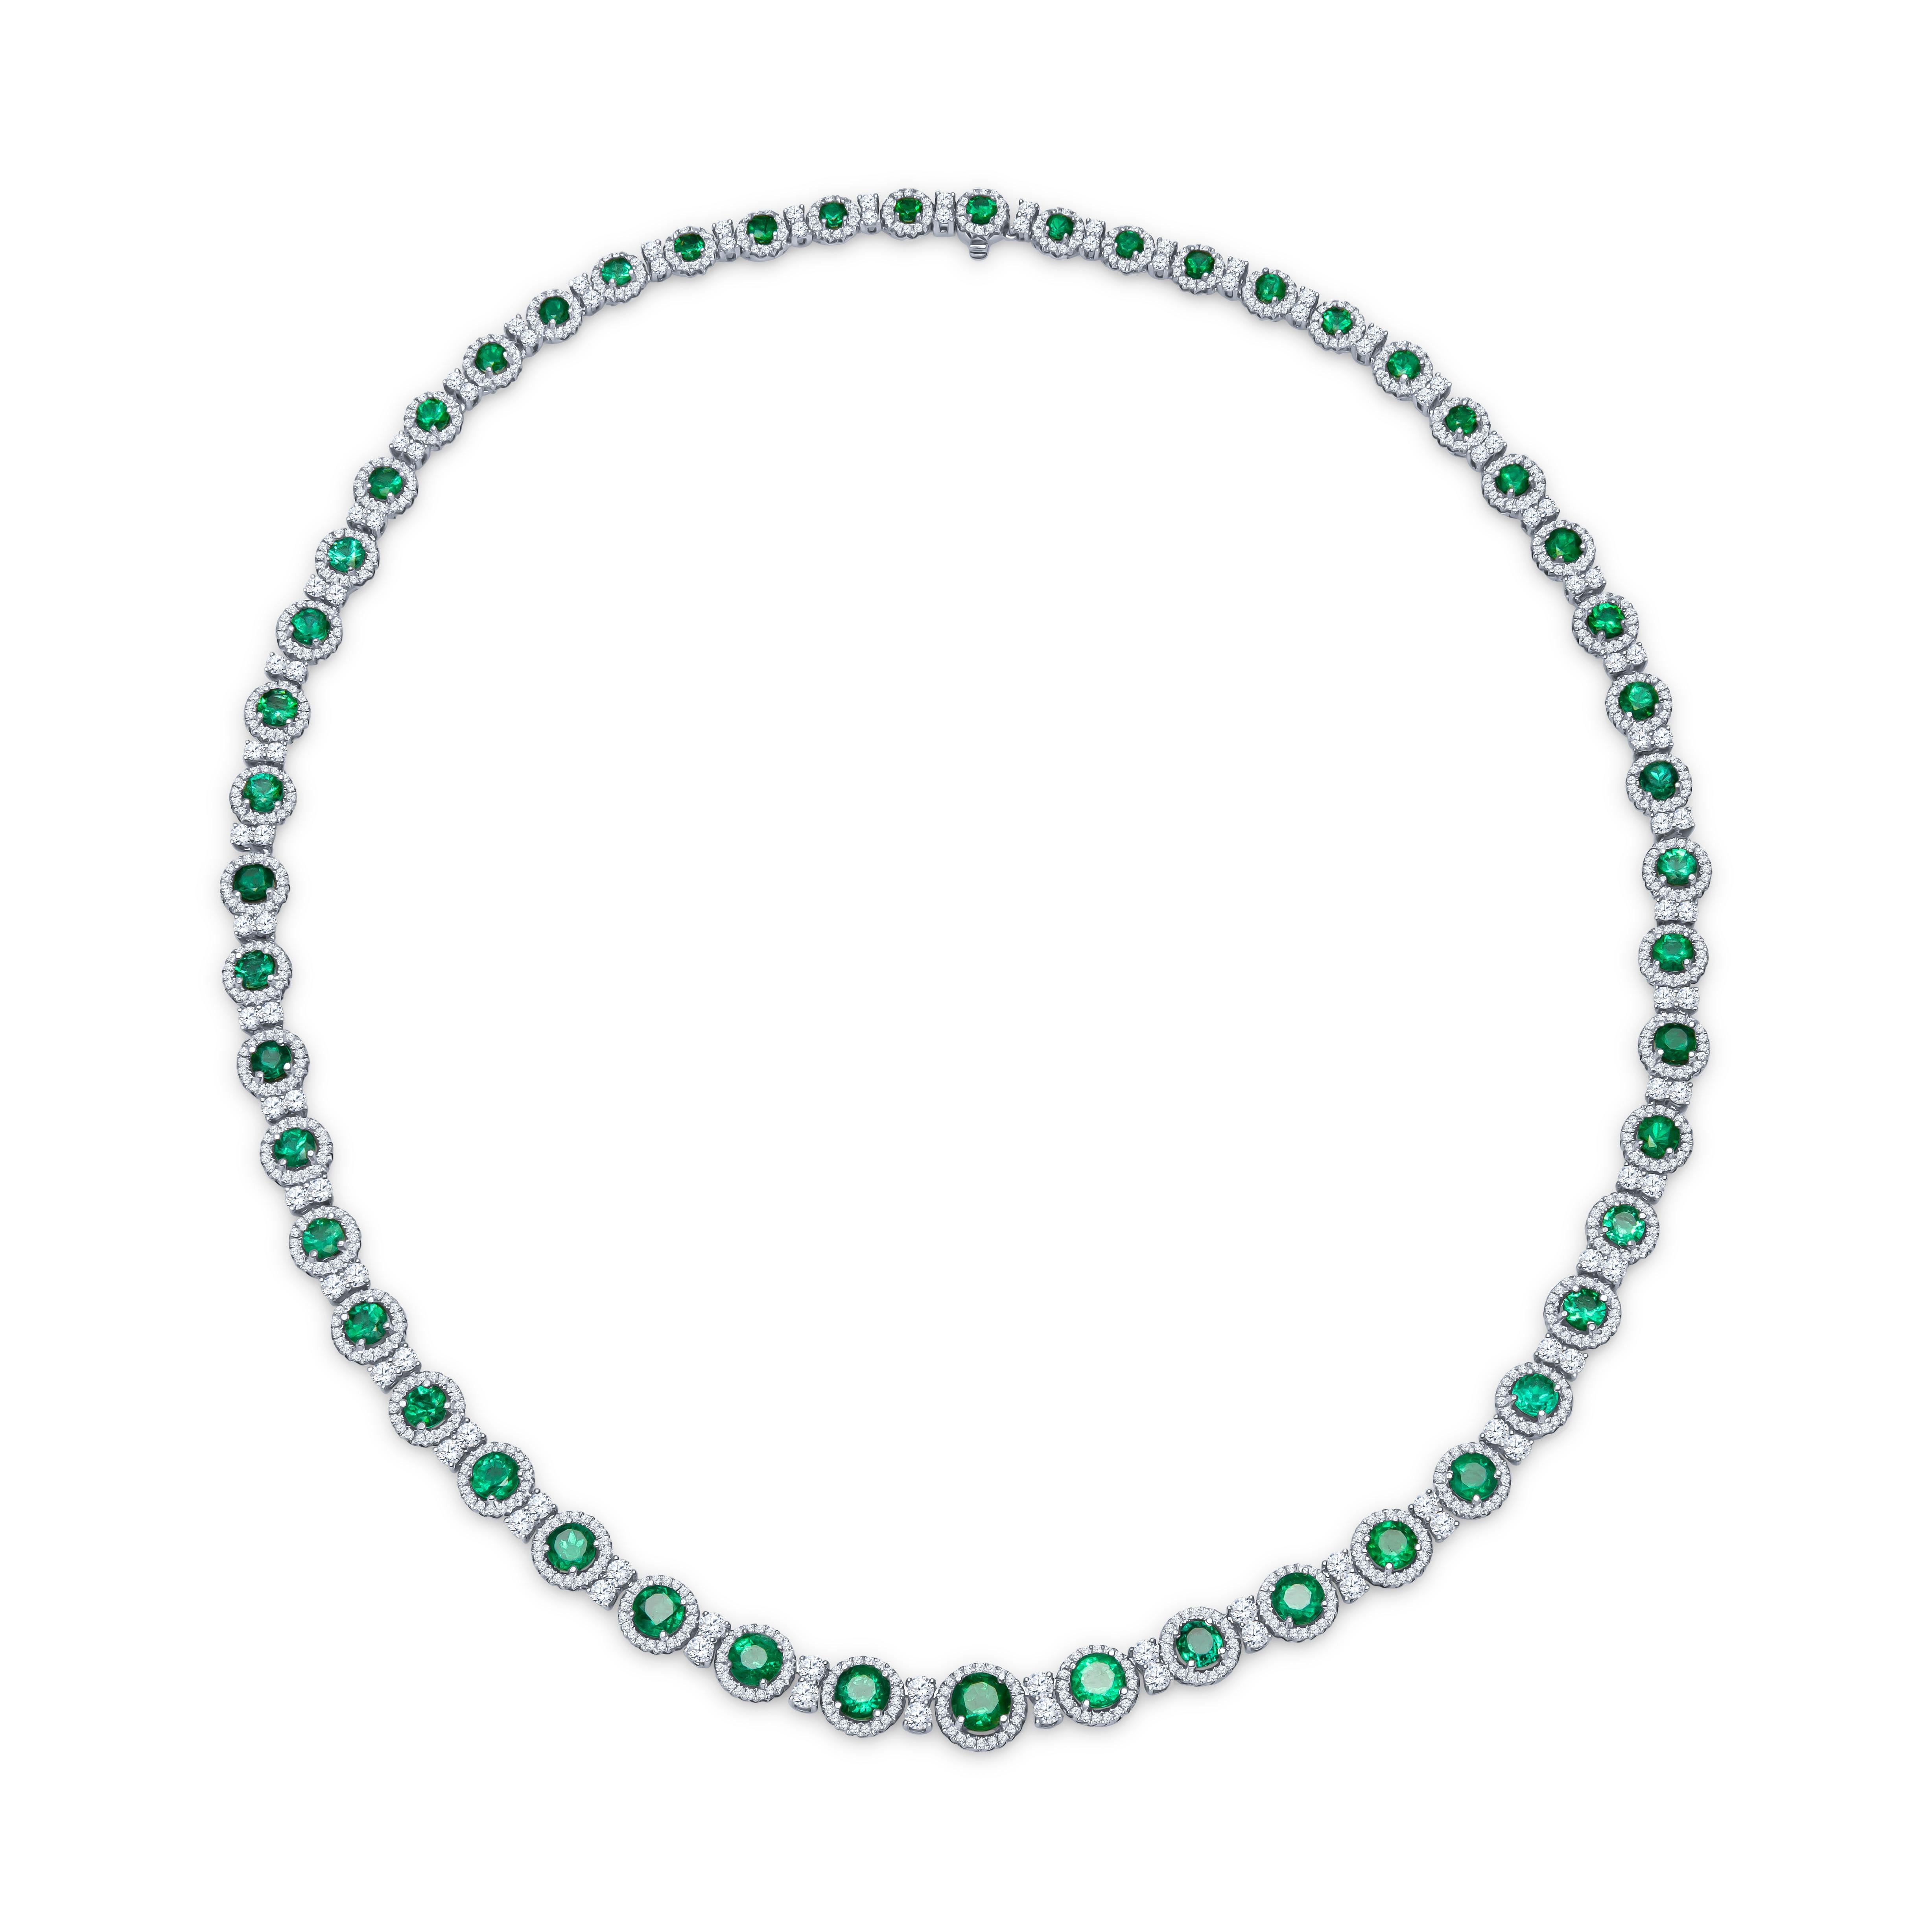 Fine emerald necklace containing 10.76 carats total in round natural emeralds with 6.95 carats total weight of round brilliant cut diamonds surrounding the emeralds. Elegantly set in an 18K white gold necklace with a length of 16.5